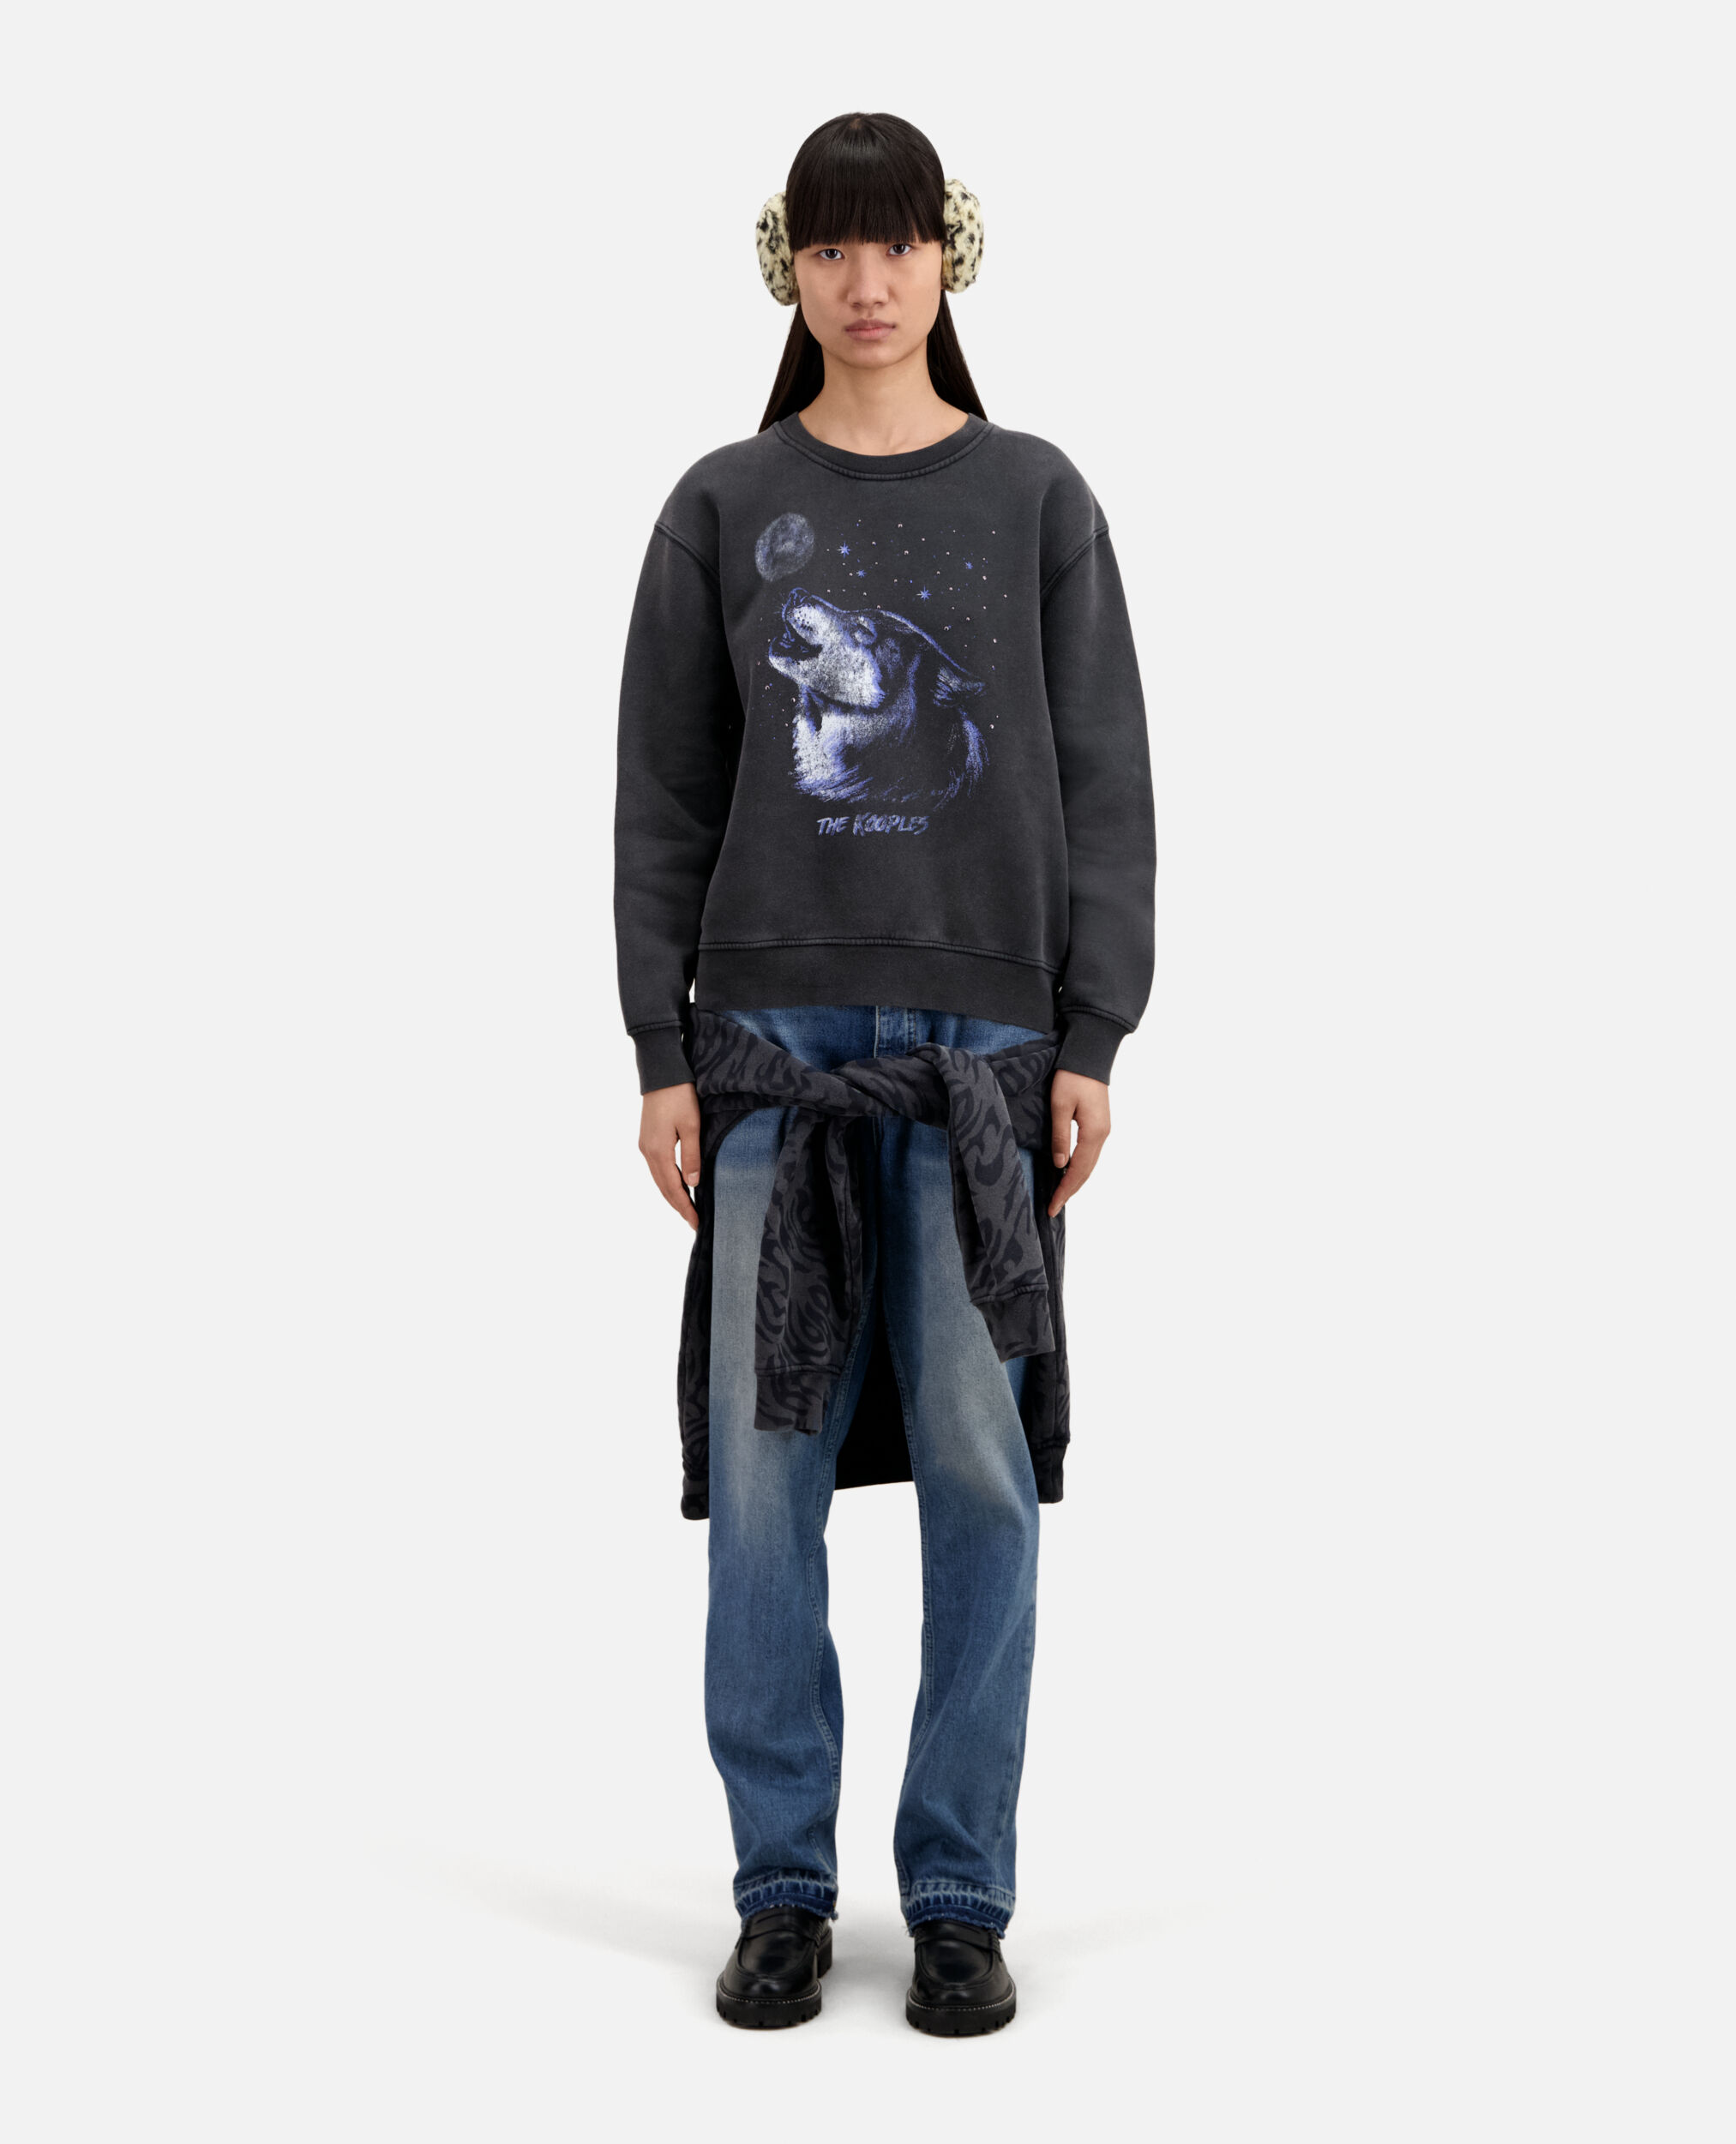 Women's Black sweatshirt with Wolf serigraphy, BLACK WASHED, hi-res image number null